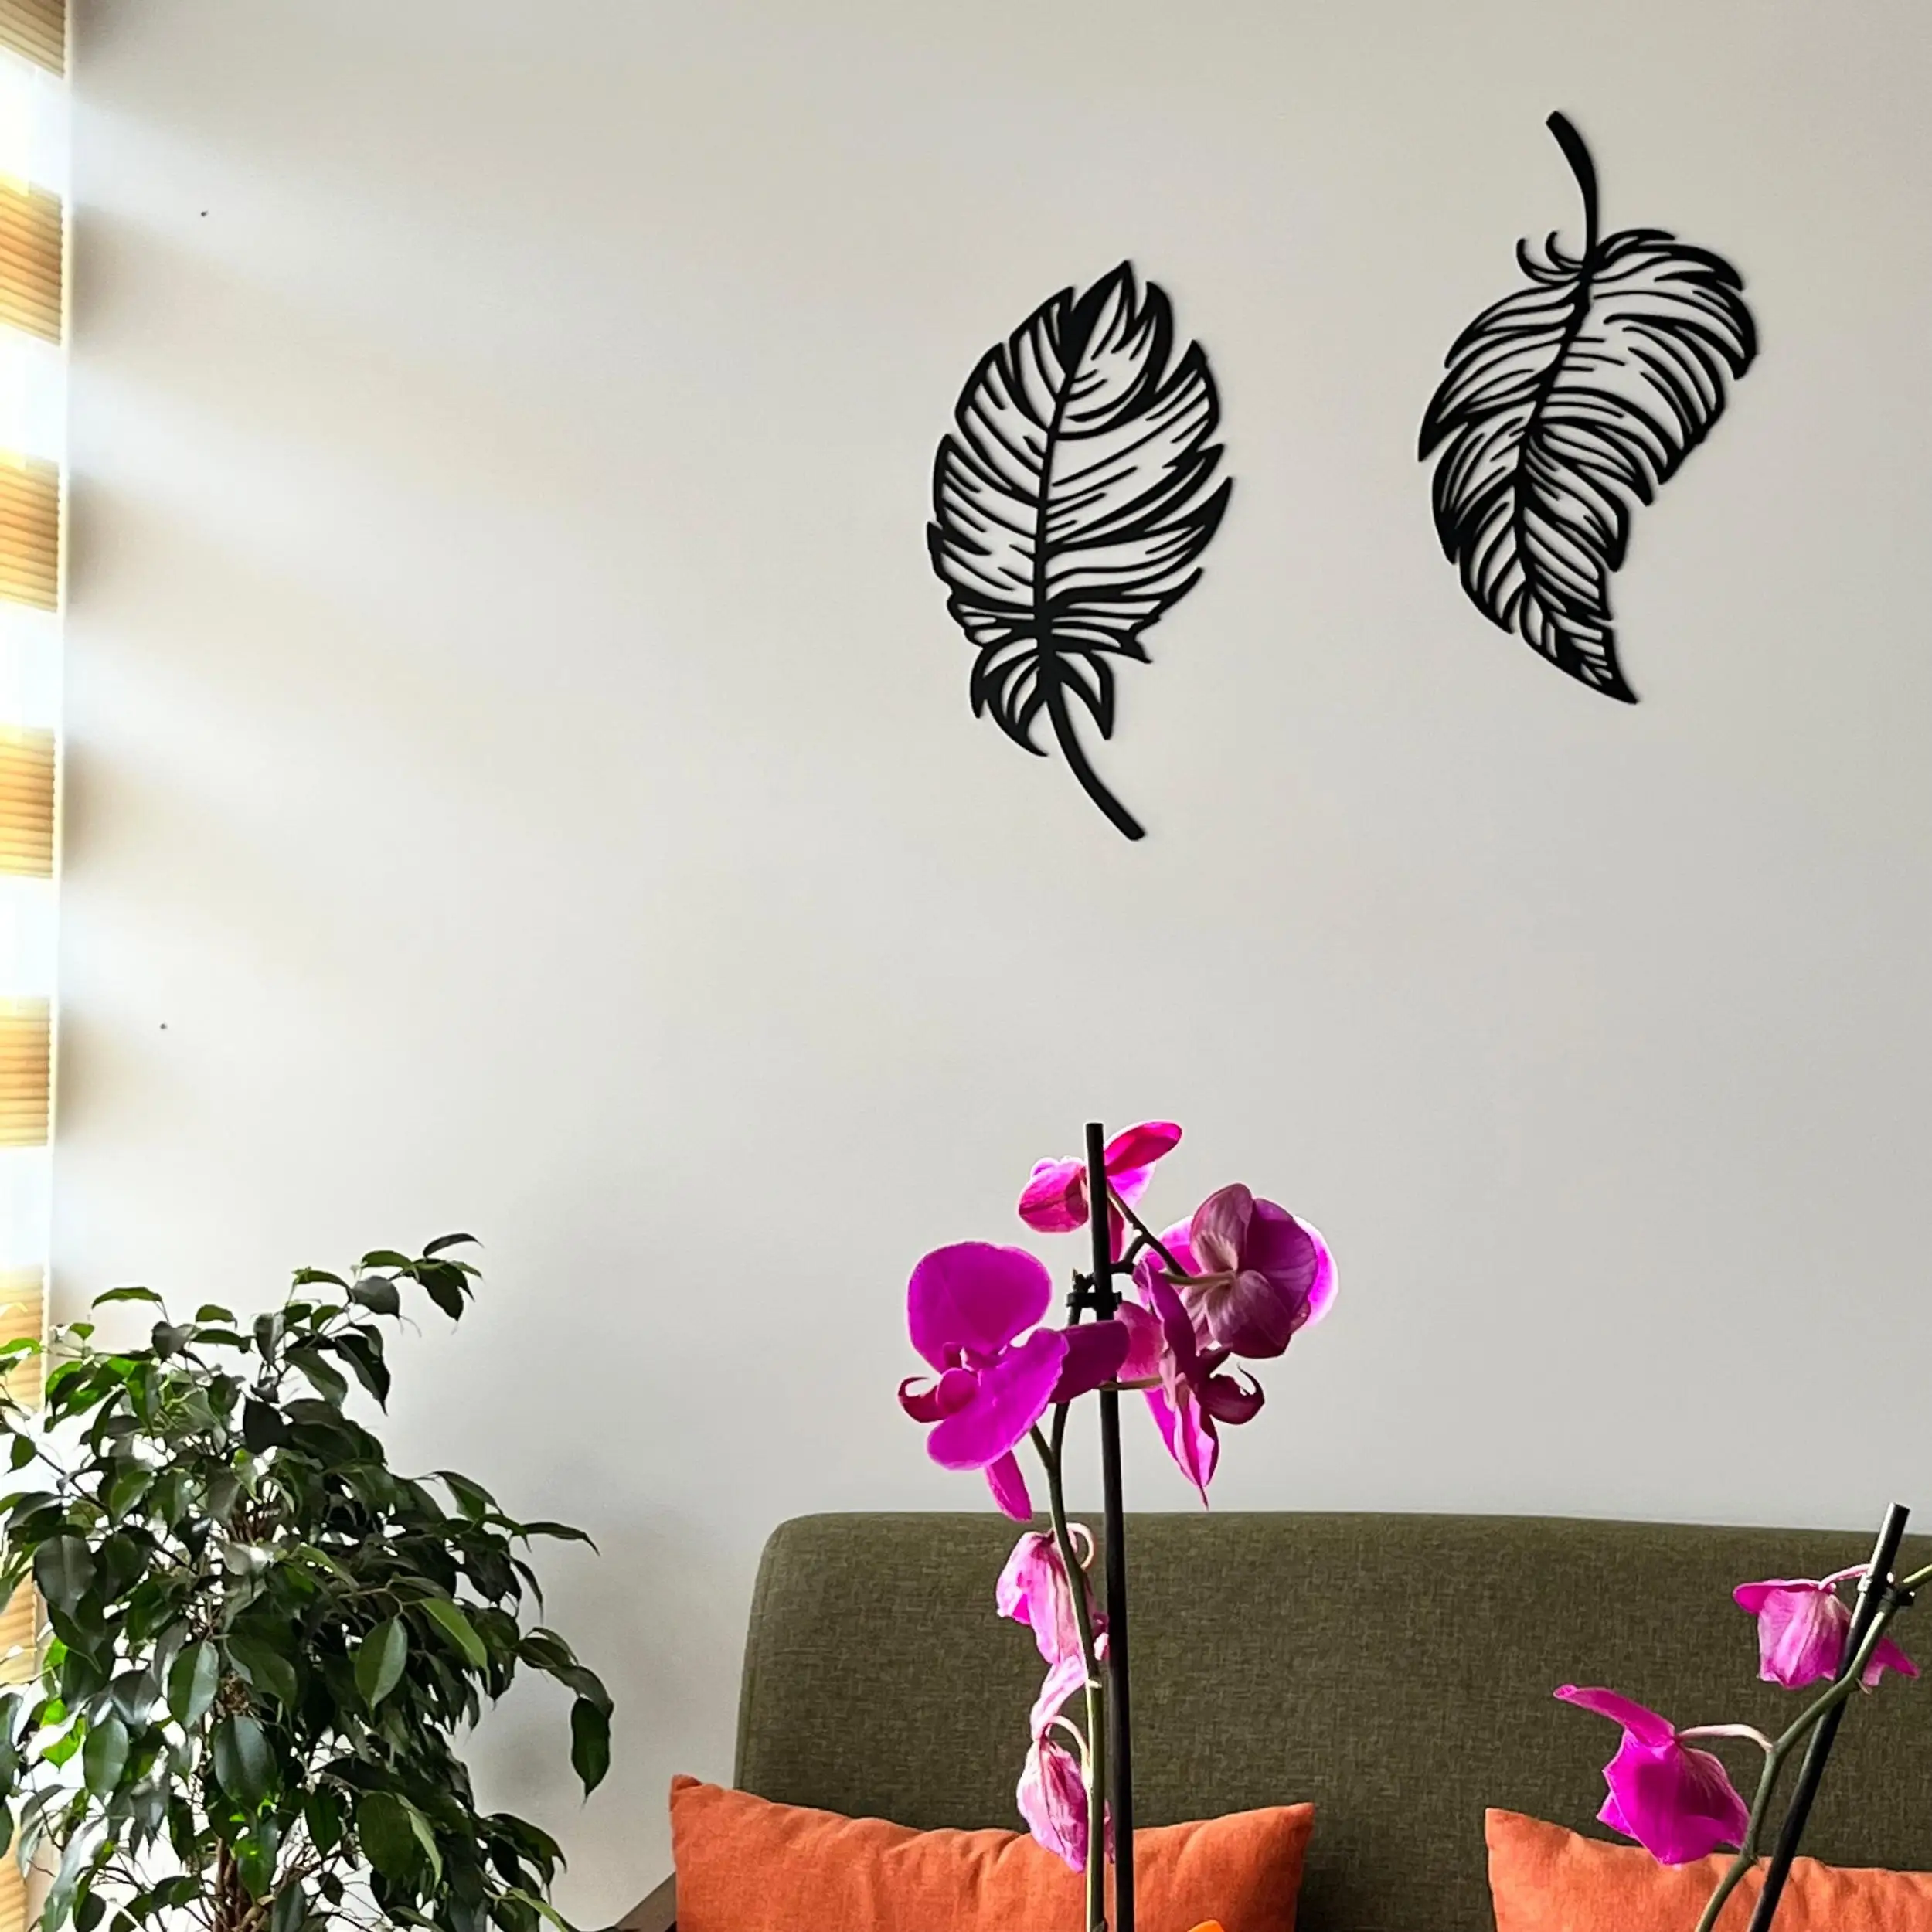 

Wooden Double Leaf Wall Decor Quality Gift Ideas Black Tree Nature Home Office Decoration Living Room Bedroom Kitchen Nordic Style New Art Creative Stylish Decorative Modern Ornament Beautiful Cute Painting Souvenir